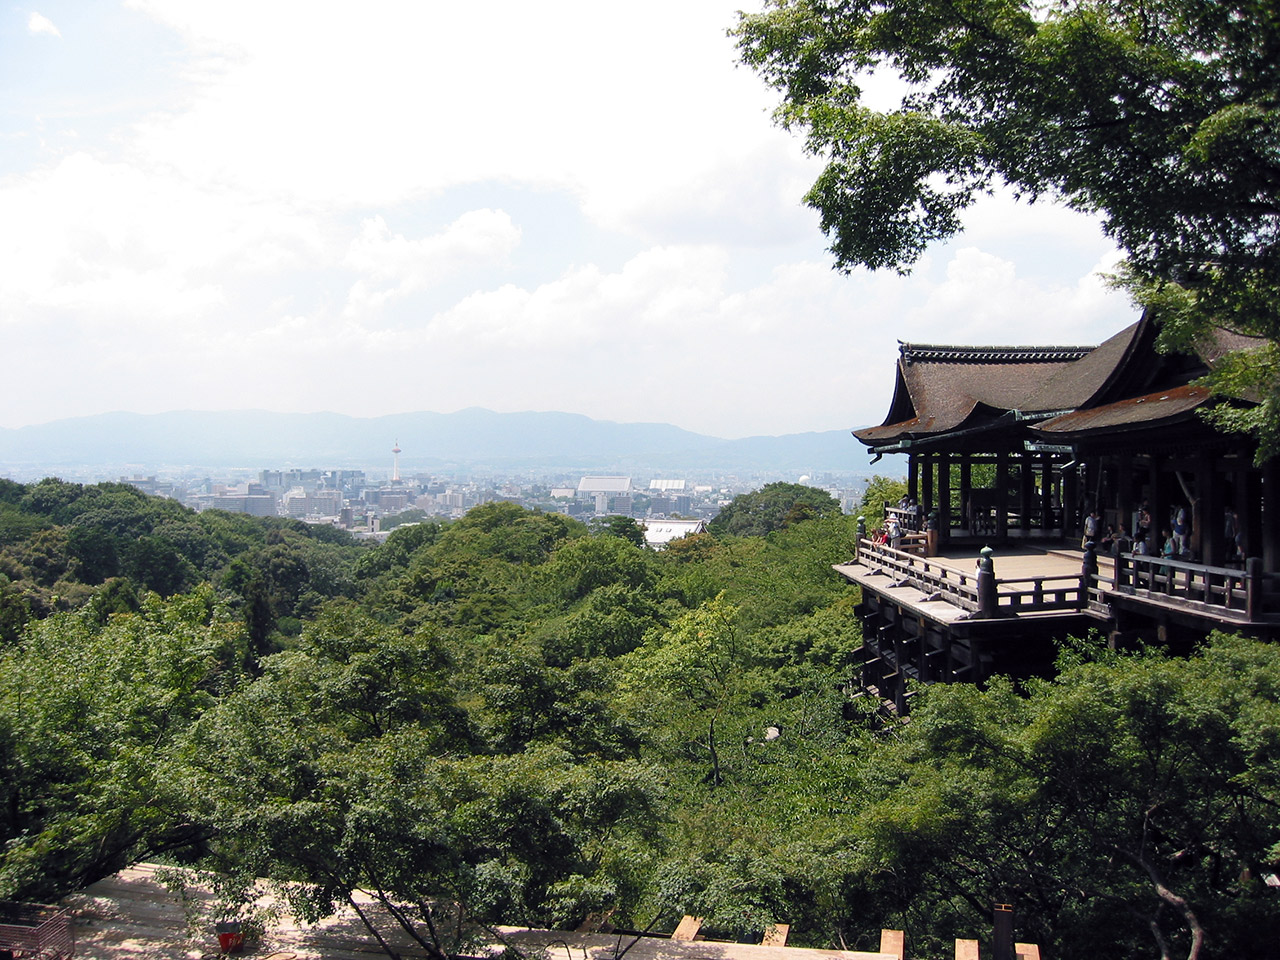 visting japan to see temples in kyoto